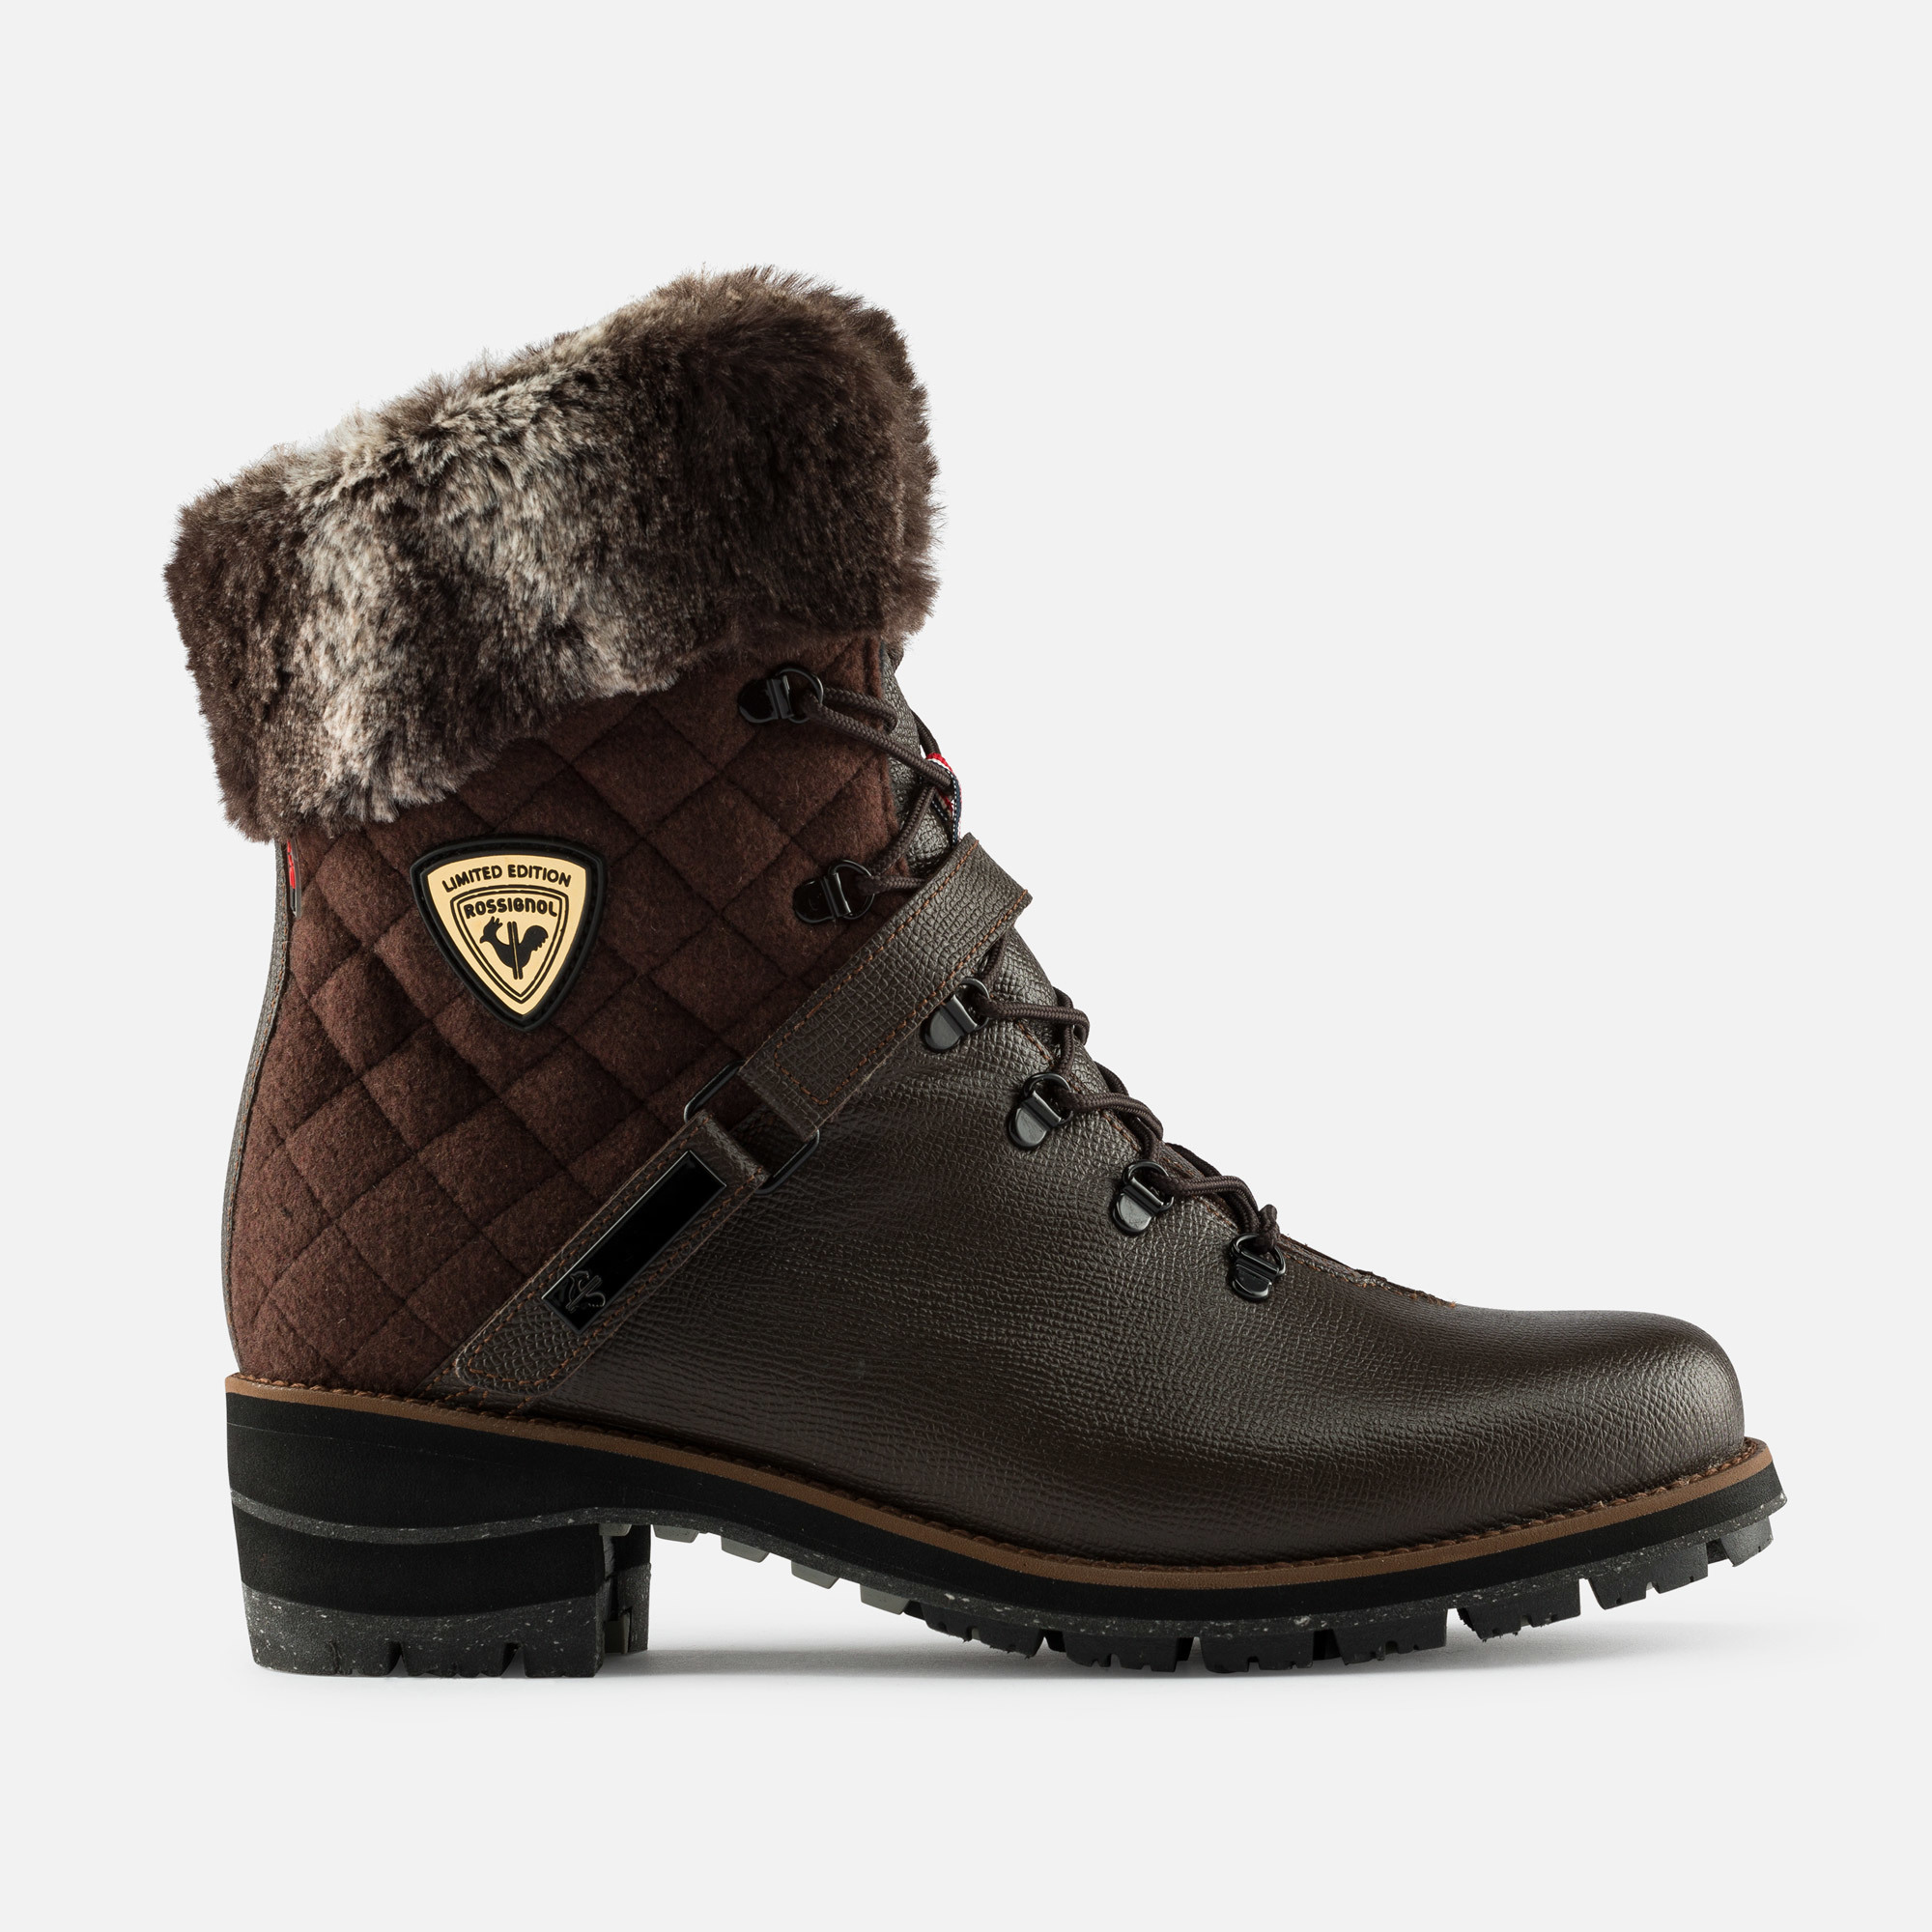 Women's 1907 Megeve Limited Edition Brown Boots